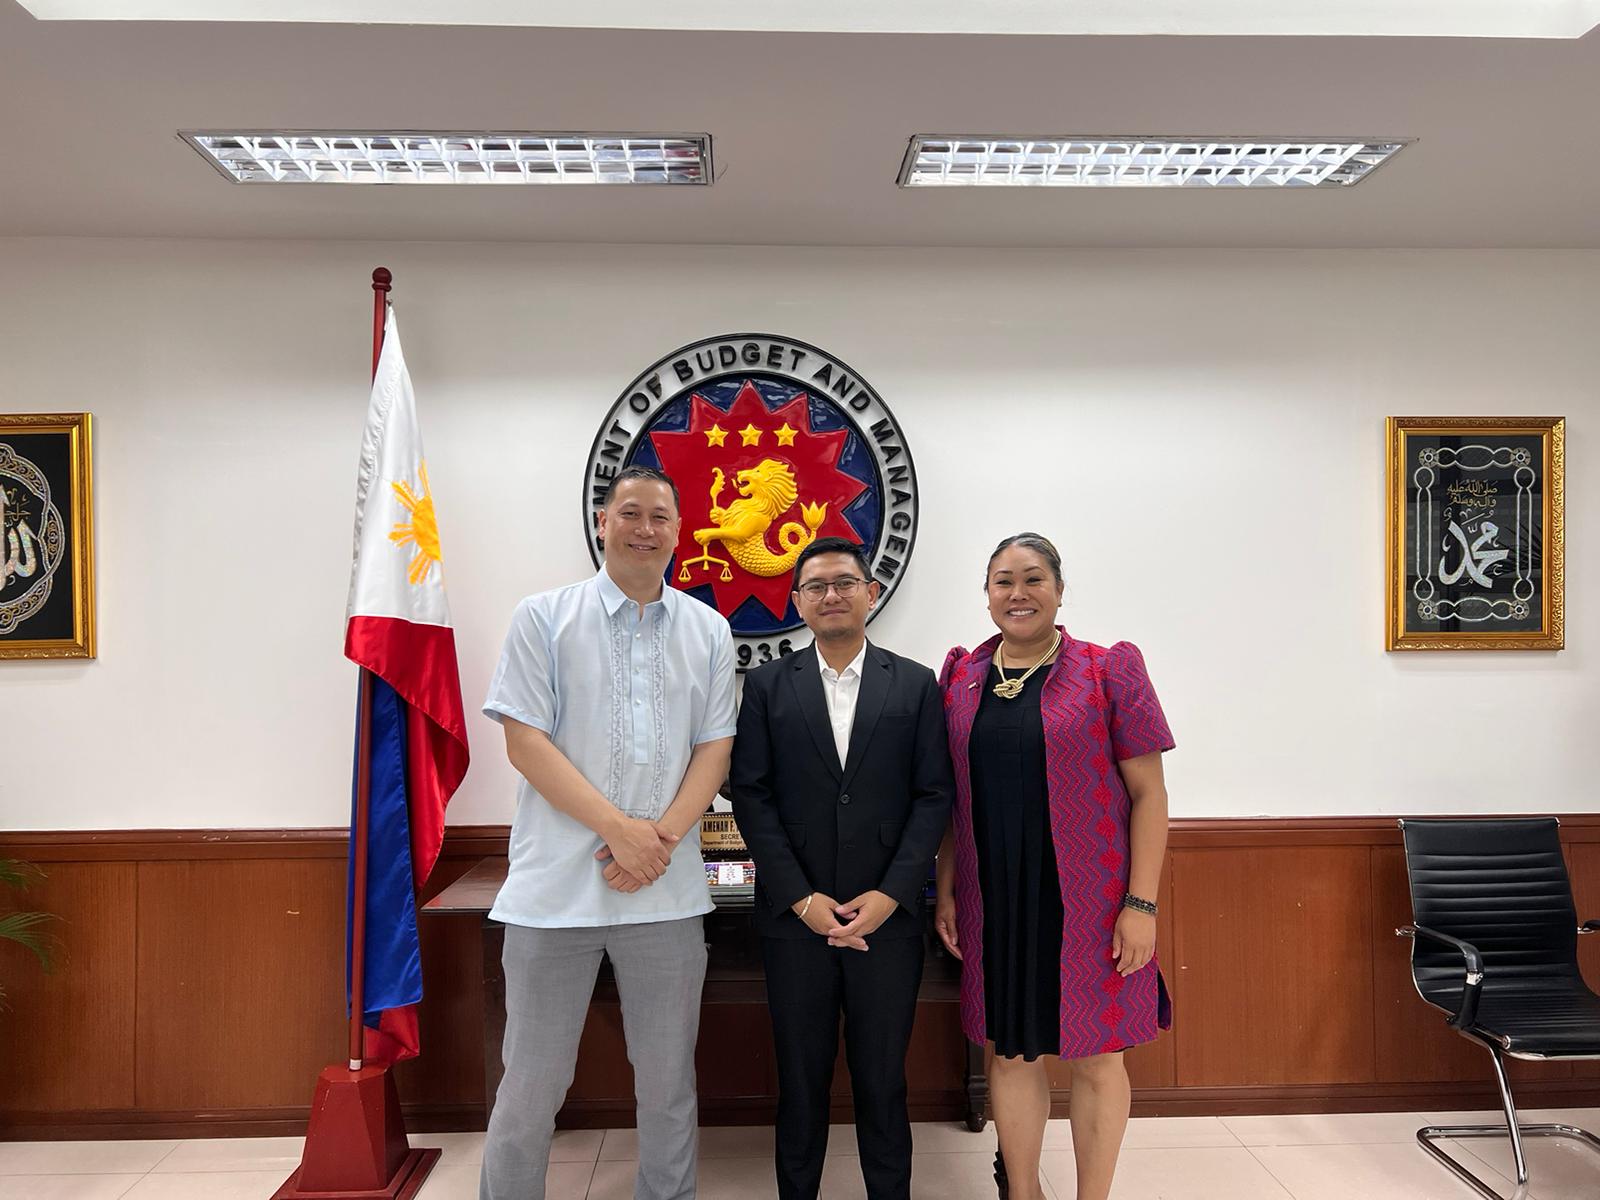 Office of Budget and Management – Courtesy Call